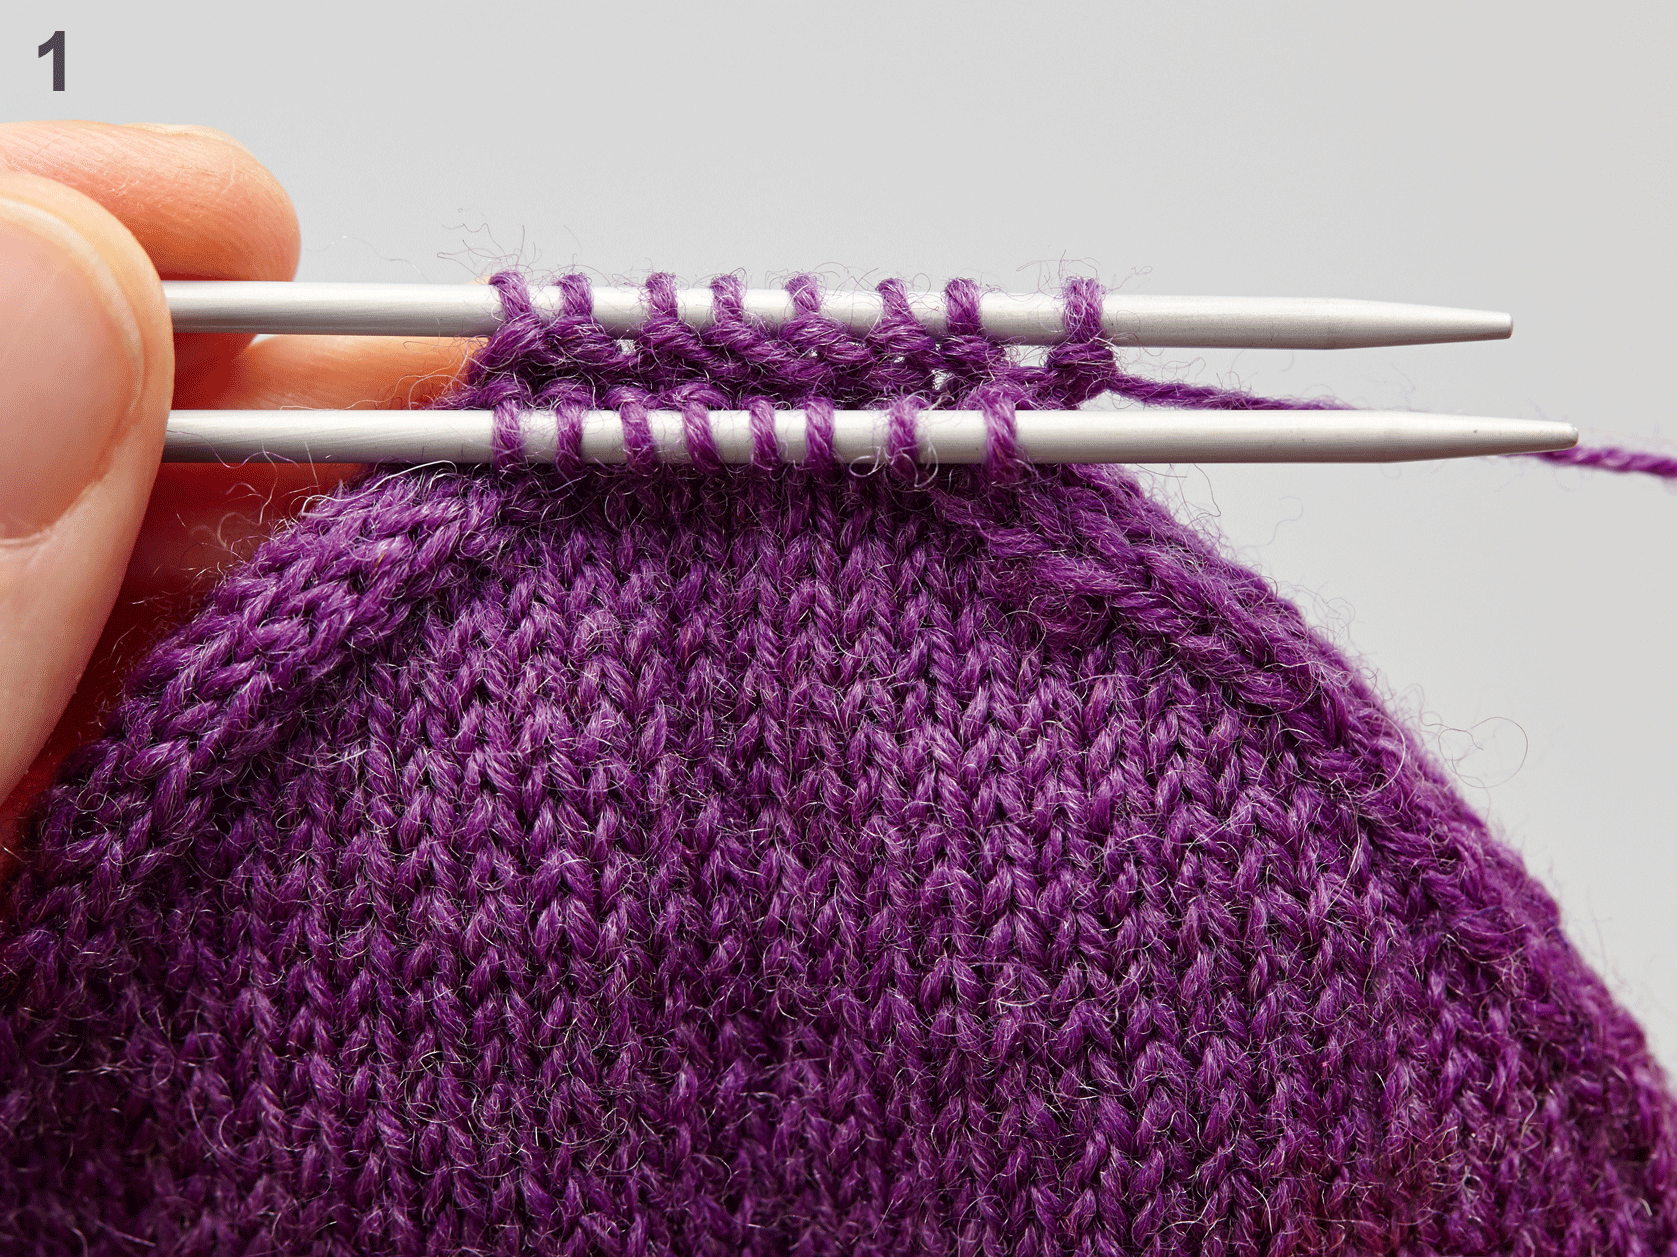 How to graft knitting with Kitchener Stitch step 1